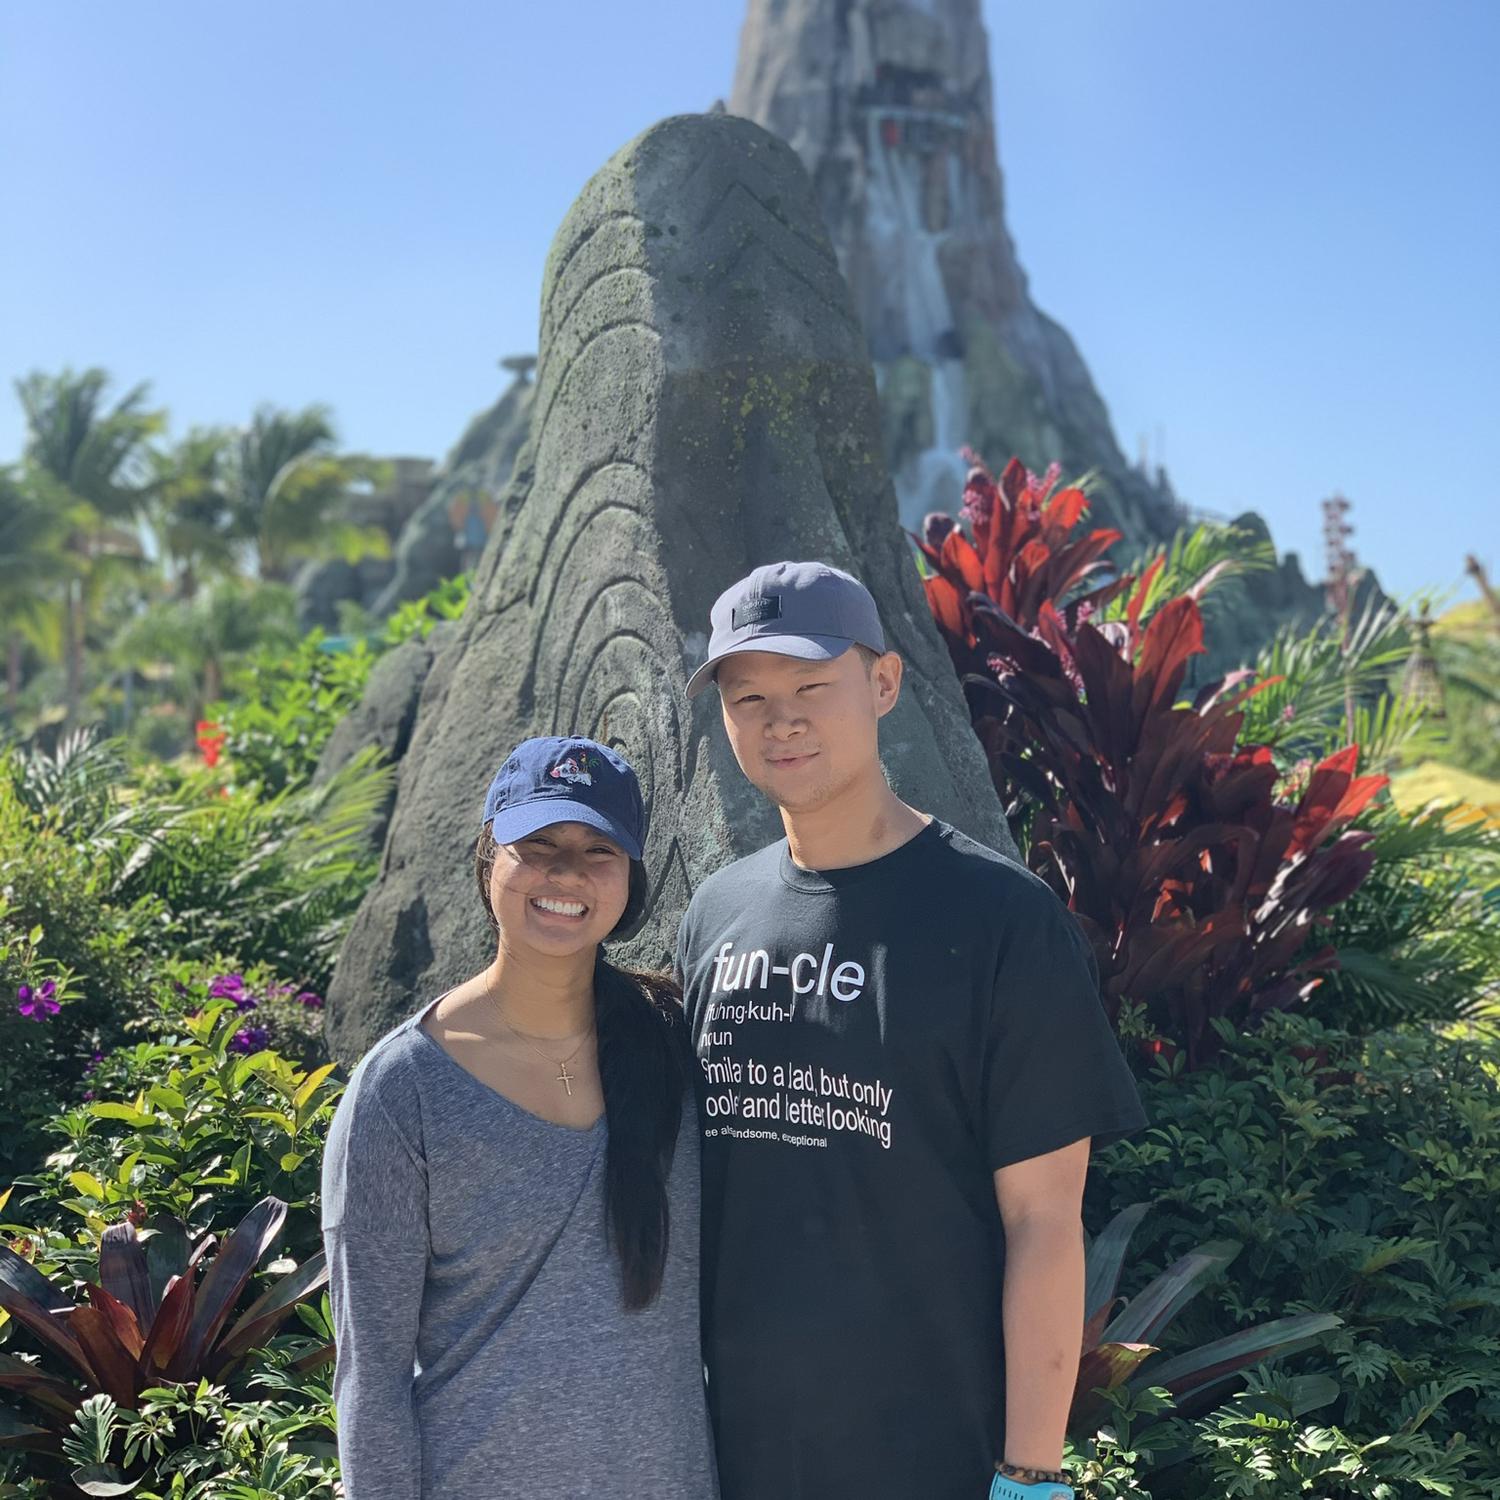 Our first photo together, Volcano Bay
December 2019